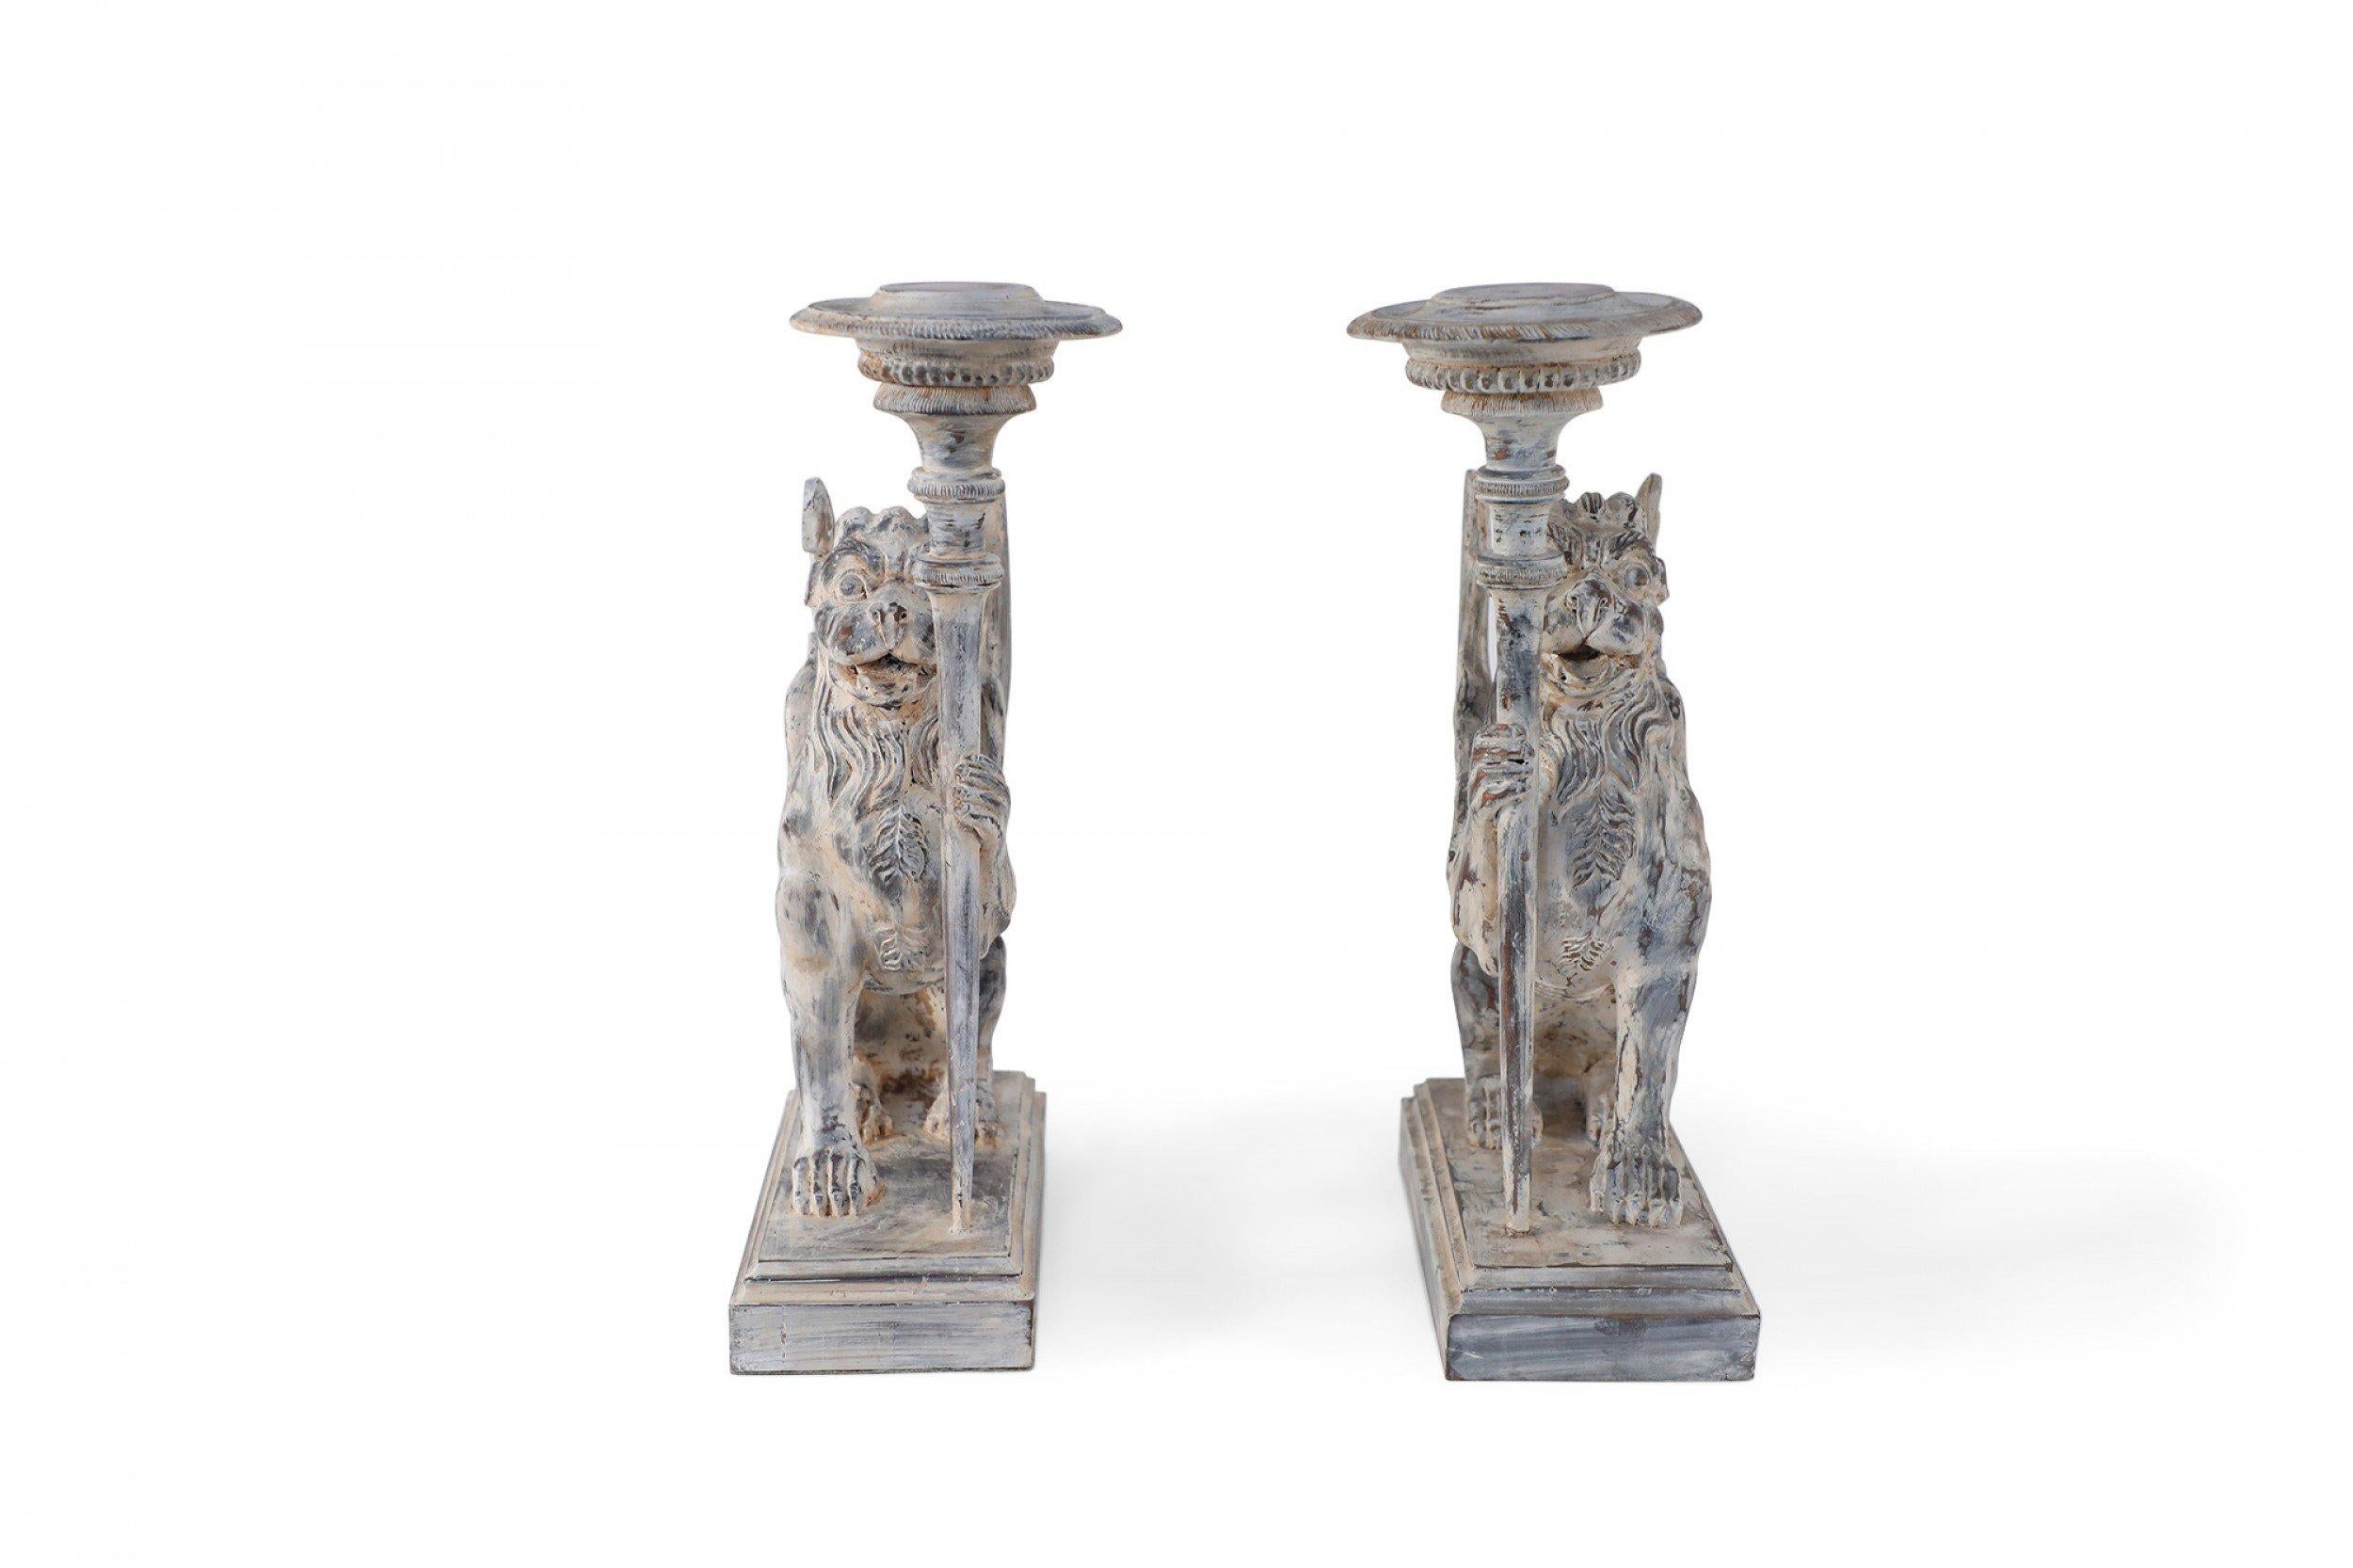 2 pairs of neo-classical style mythological carved wooden candle holders / bookends in the shape of chimeras holding a candle stick in one hand on stepped rectangular wooden bases with a white washed finish. (PRICED PER PAIR).
 